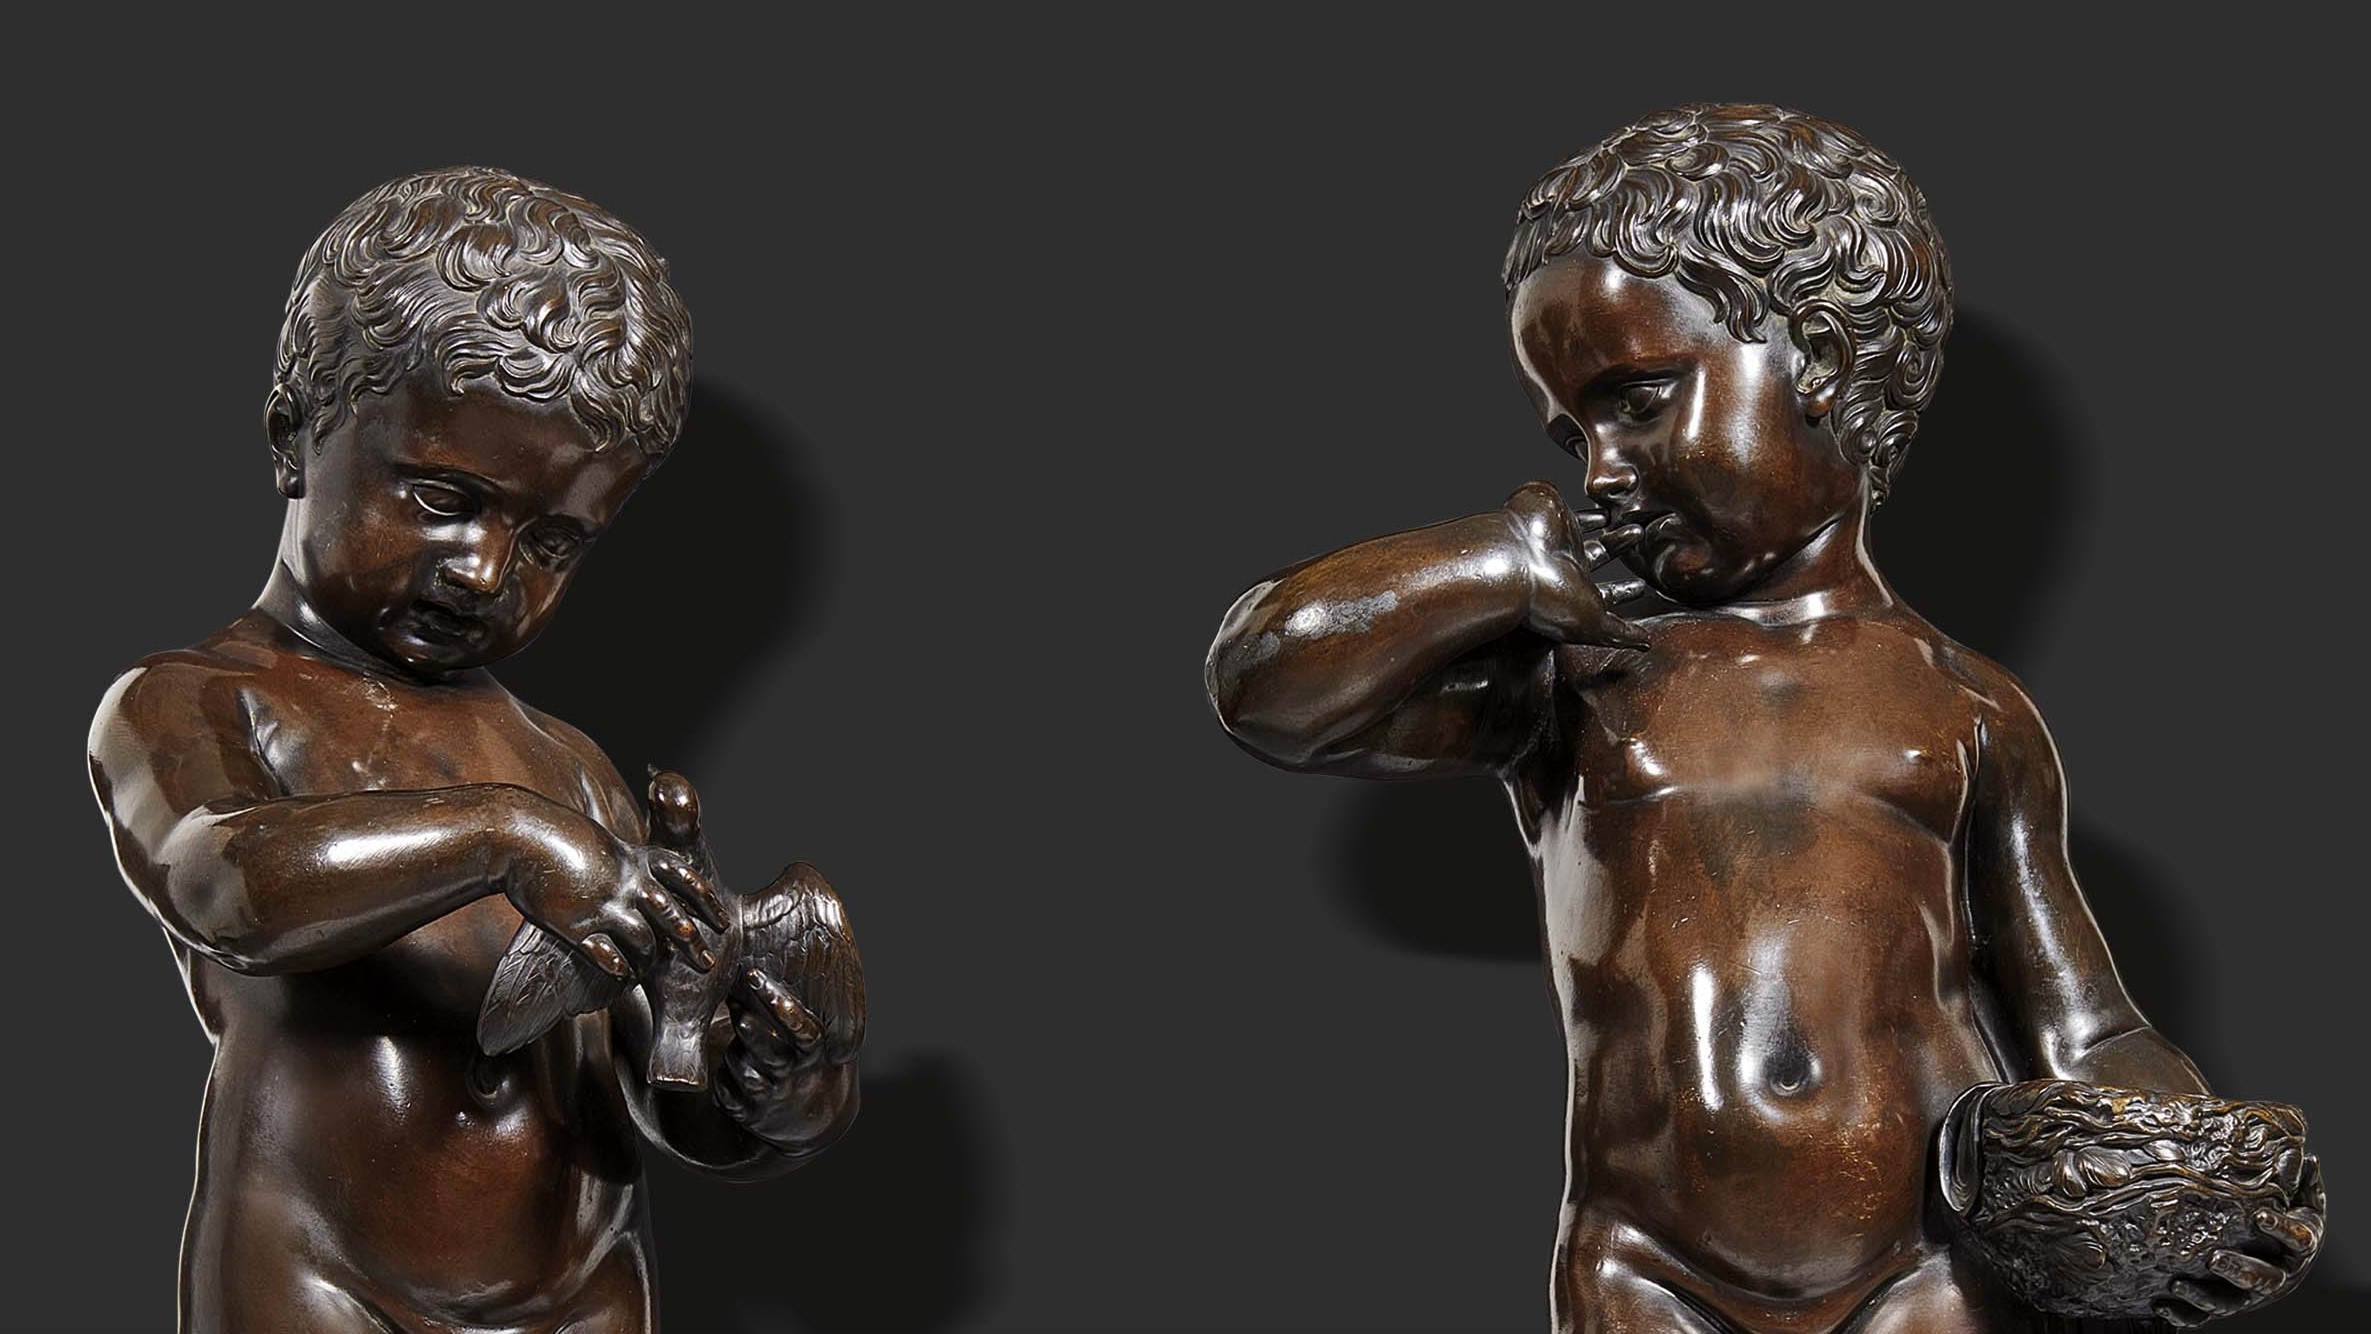 SCULPTURES AND WORKS OF ART FROM MIDDLE AGE TO 19TH CENTURY